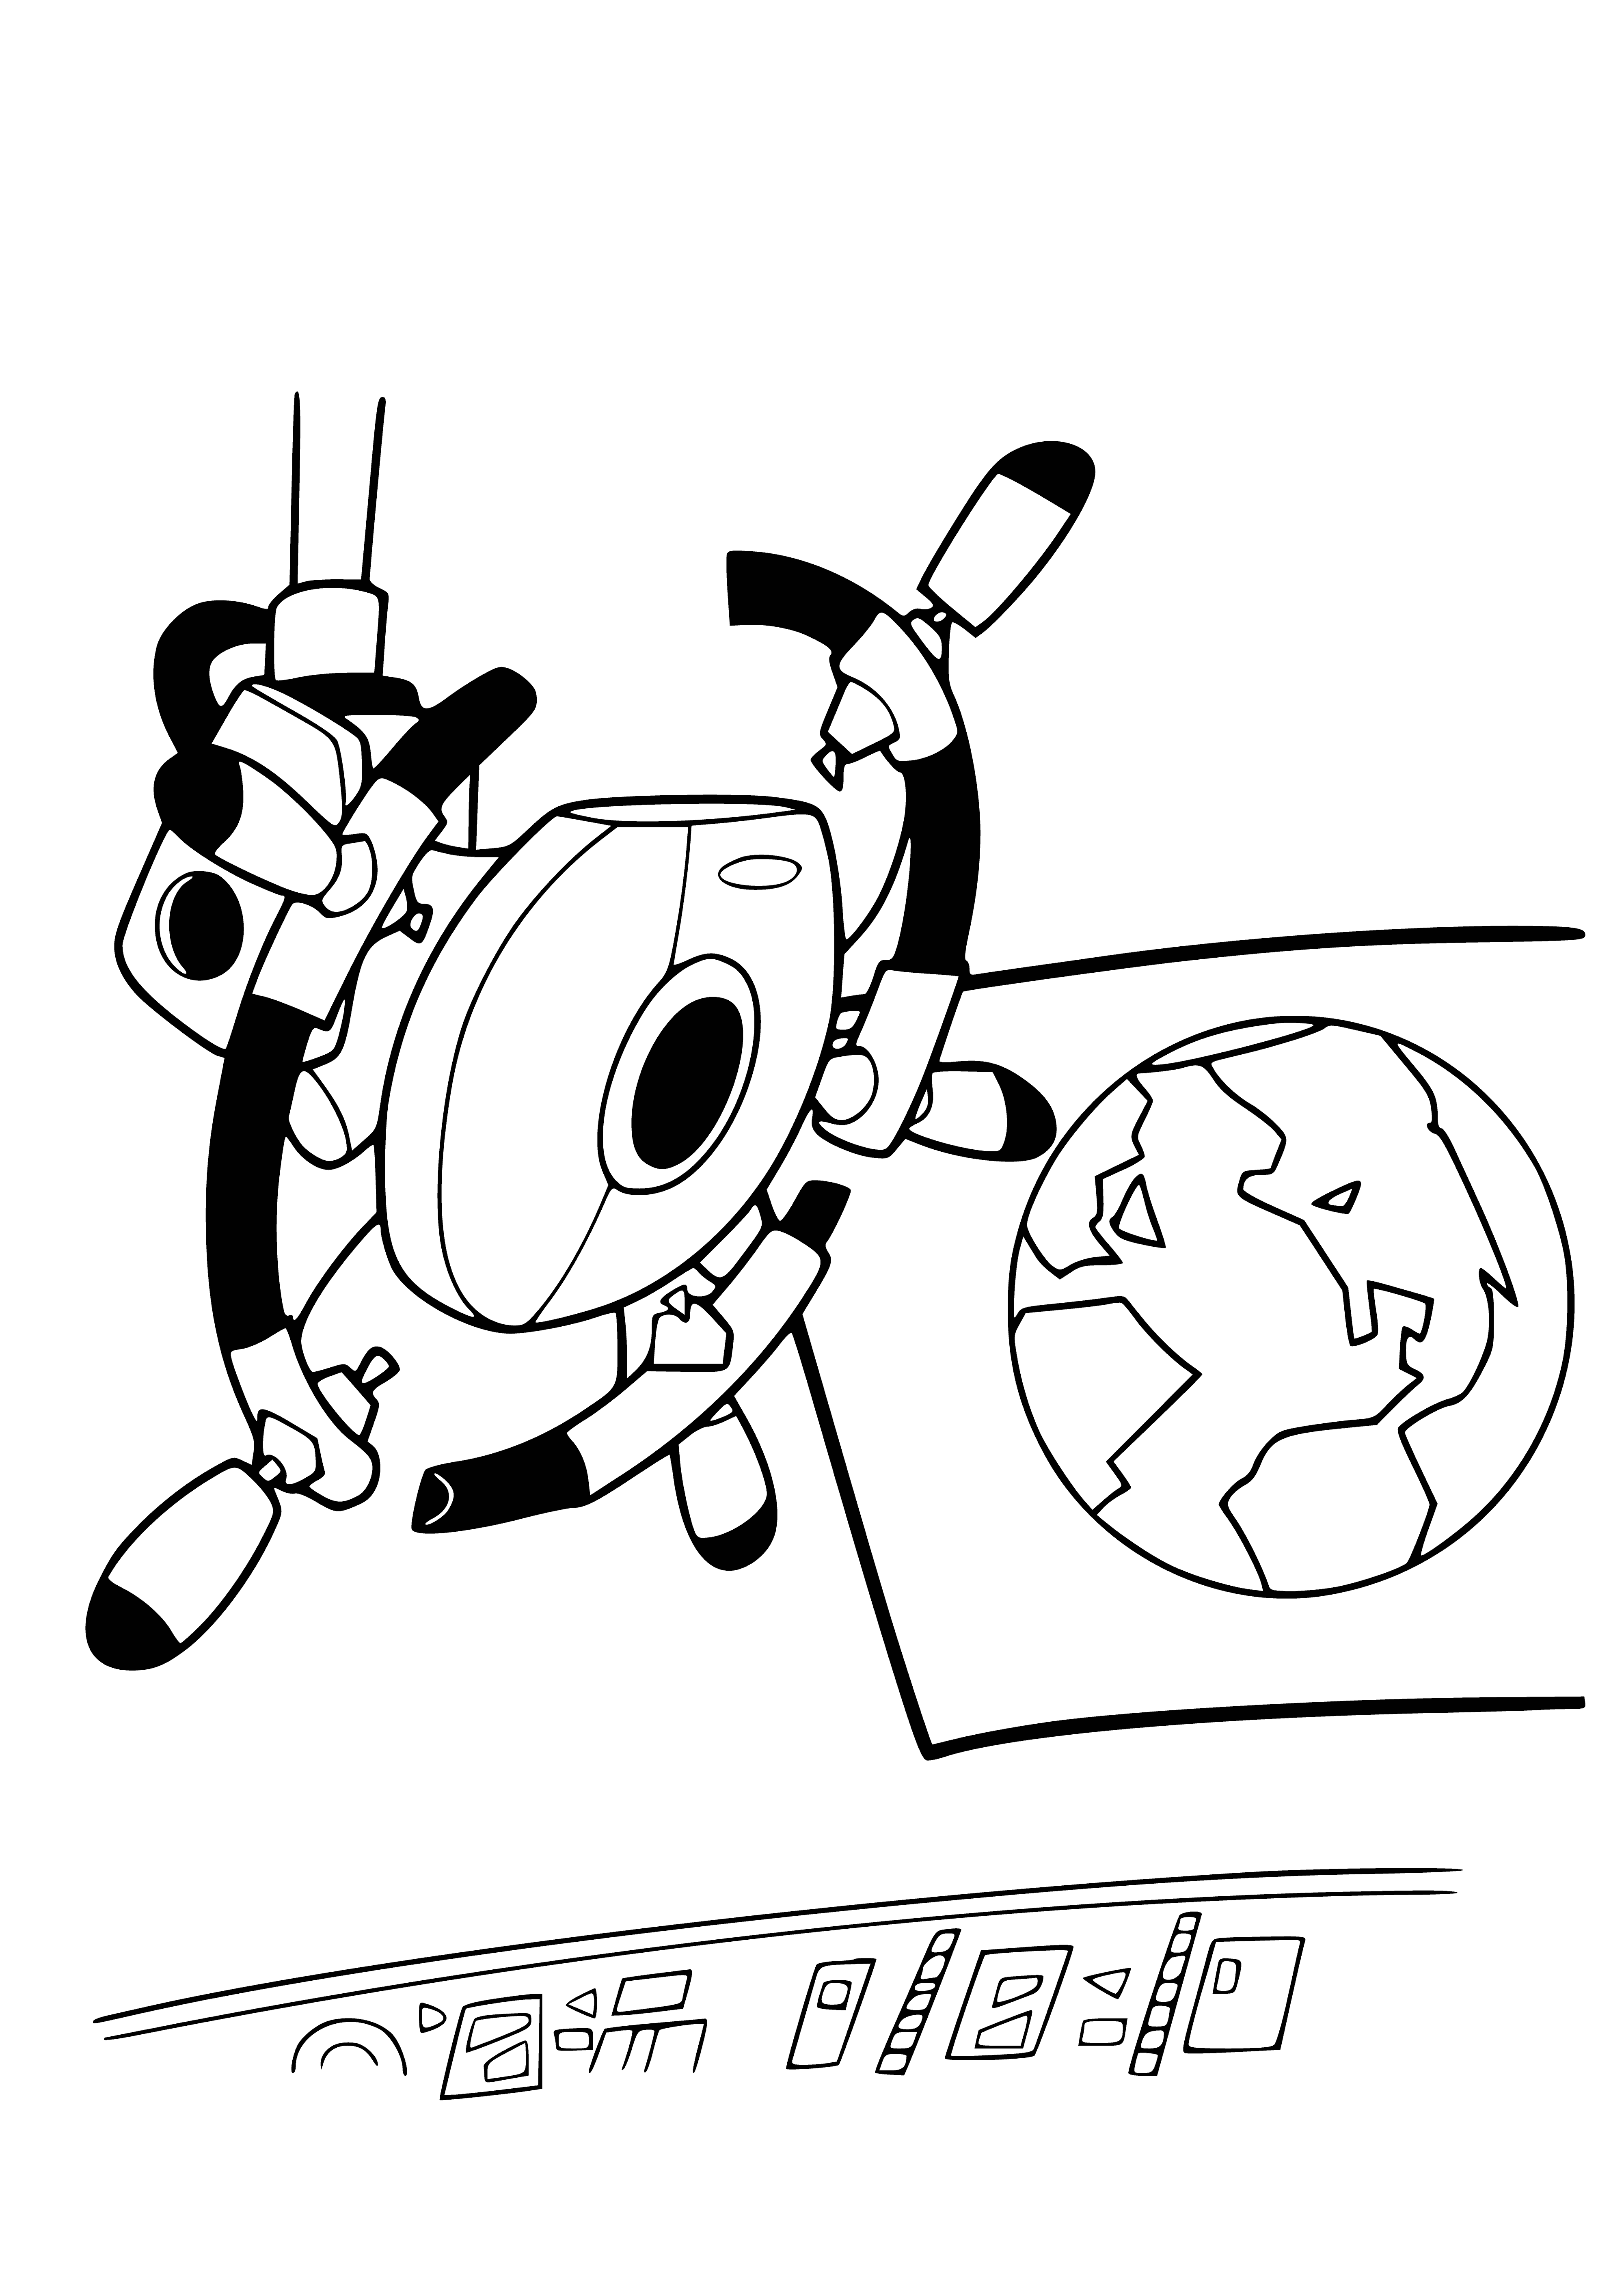 A computer coloring page